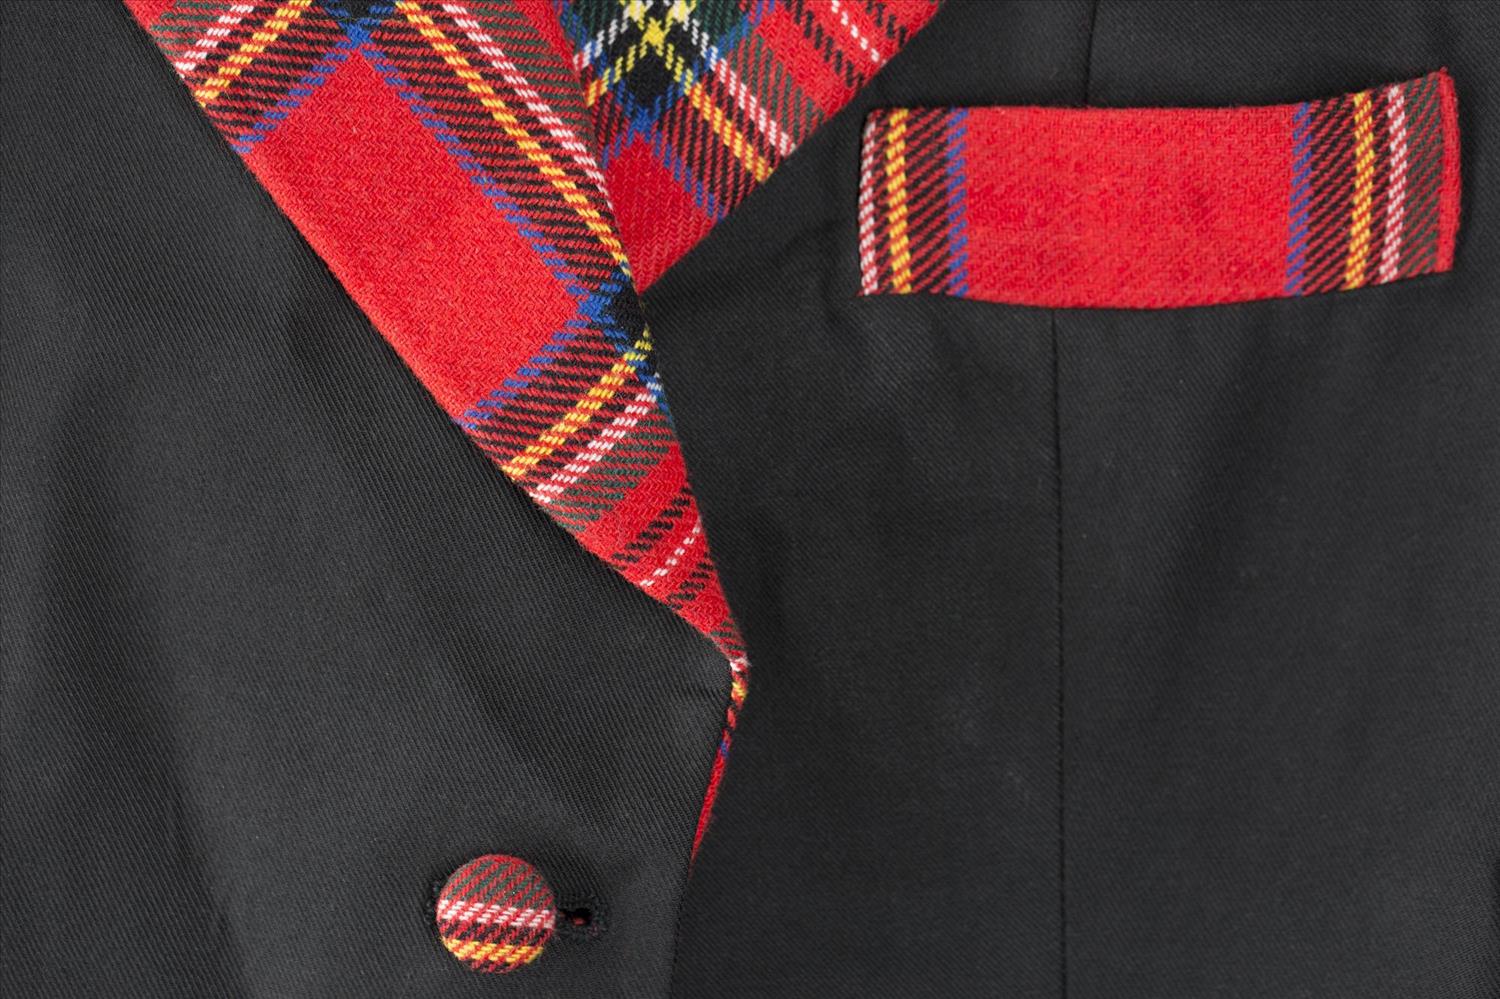 Detail of coat belonging to the Bay City Rollers.